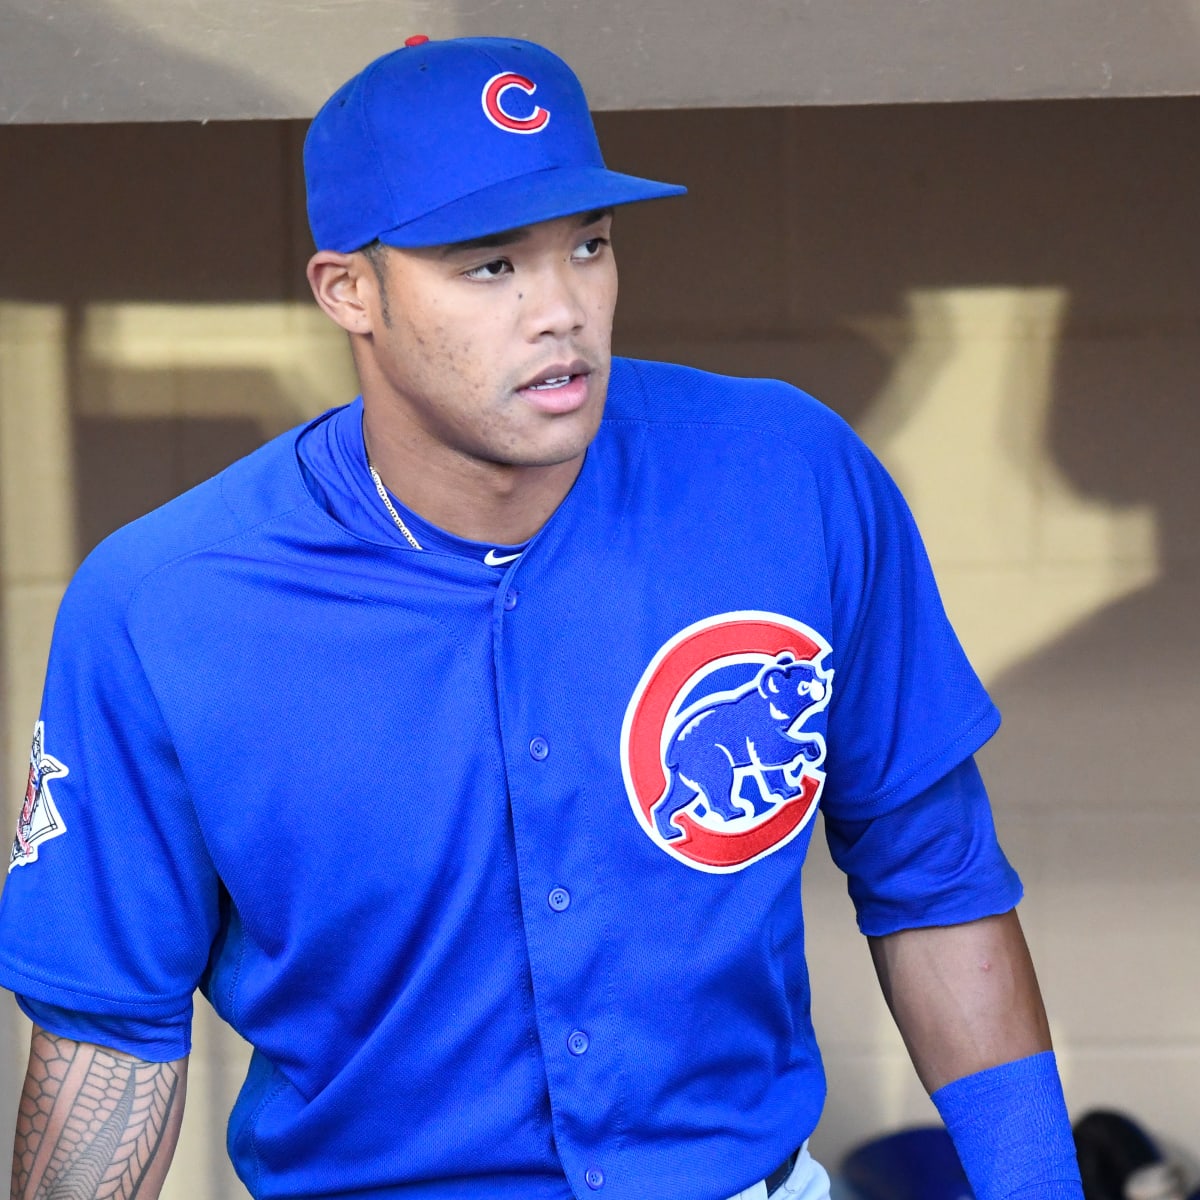 addison russell stats